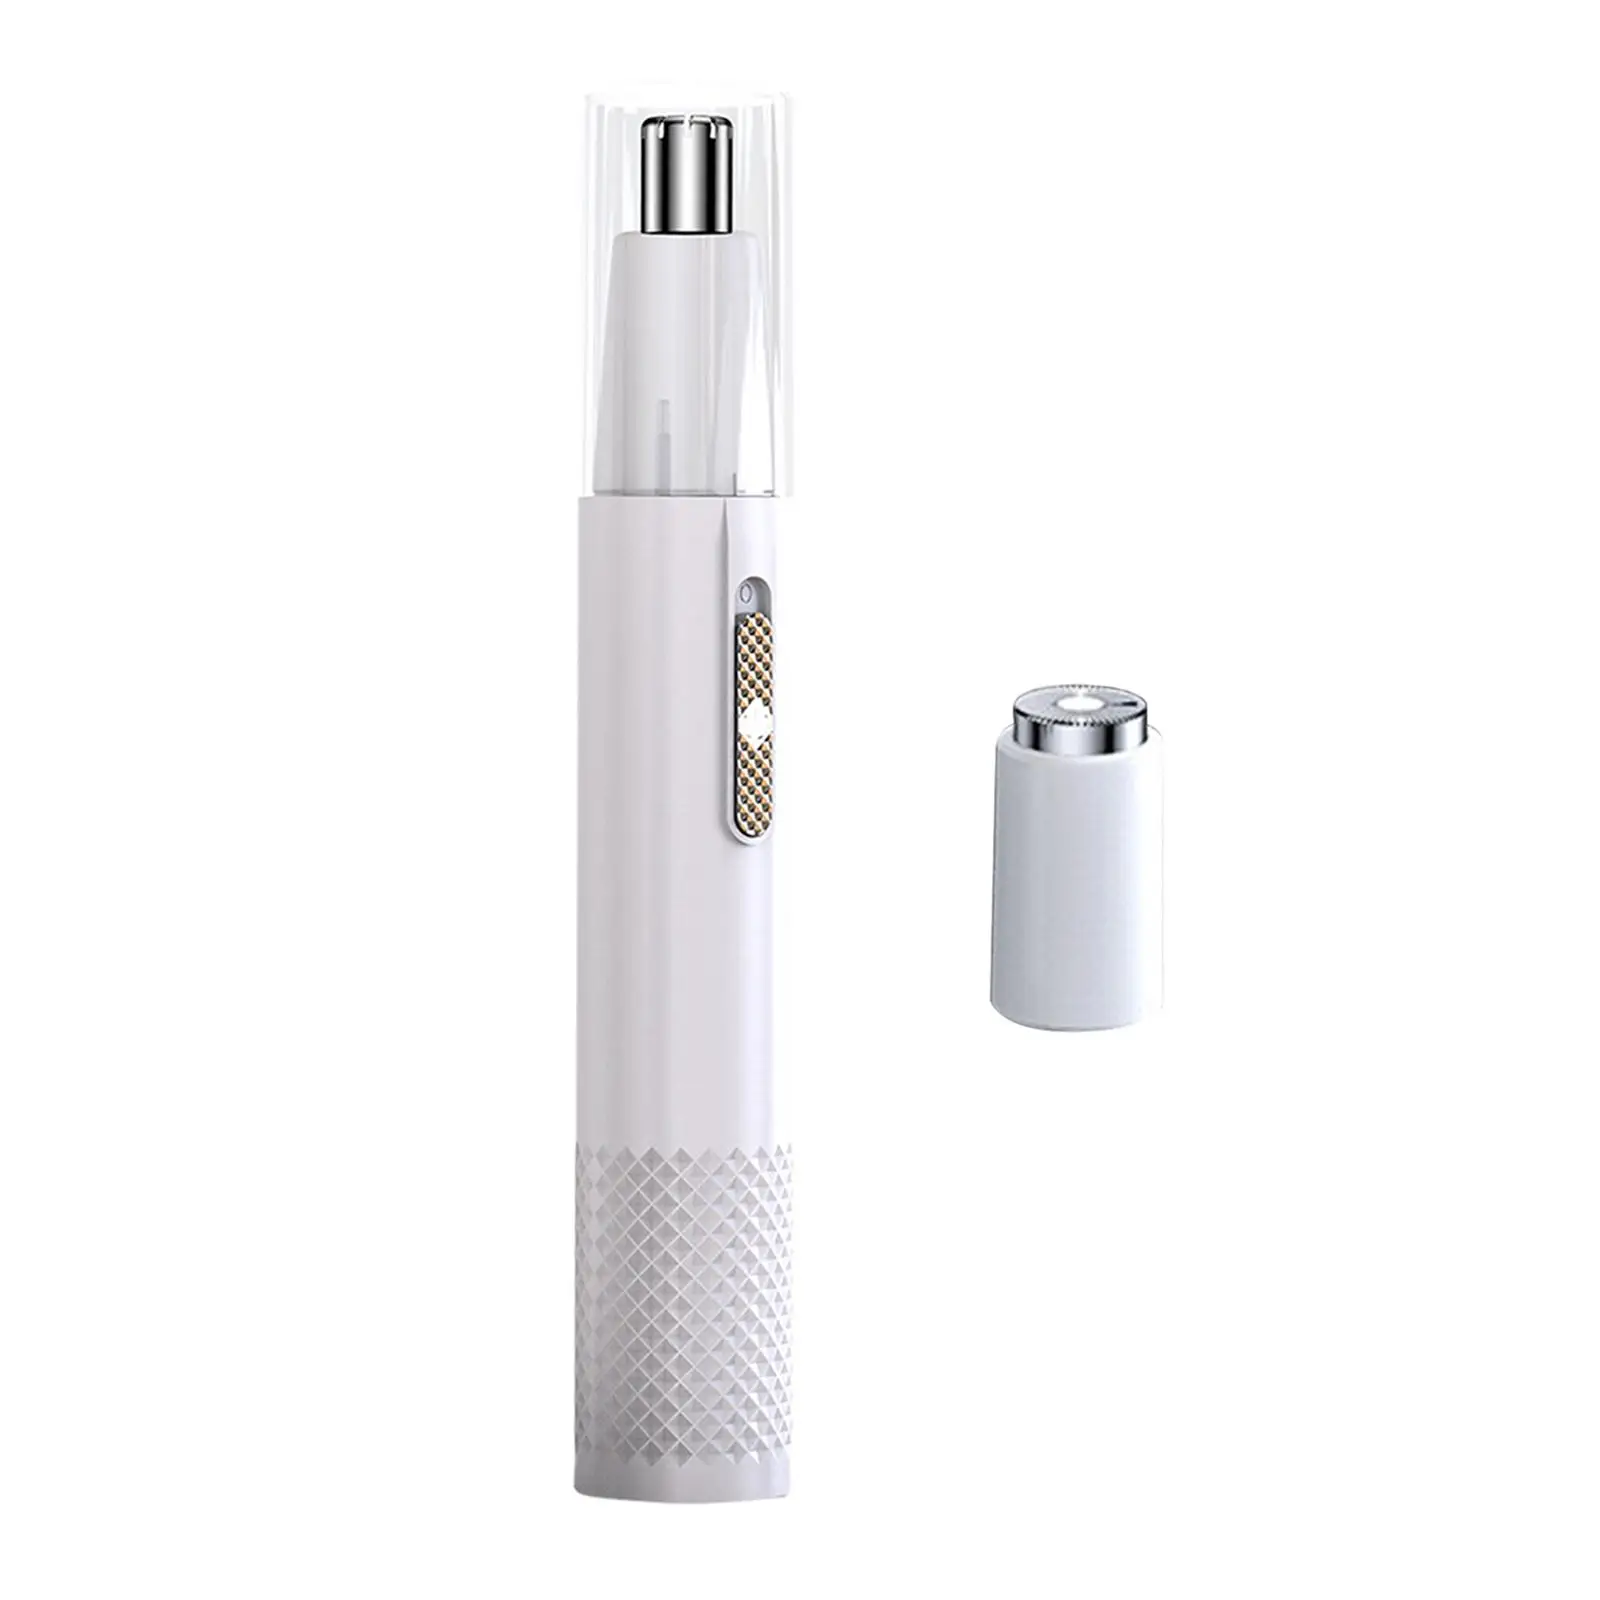 Nose and Ear Hair Trimmer Rechargeable Portable for Nose Hair Shaver